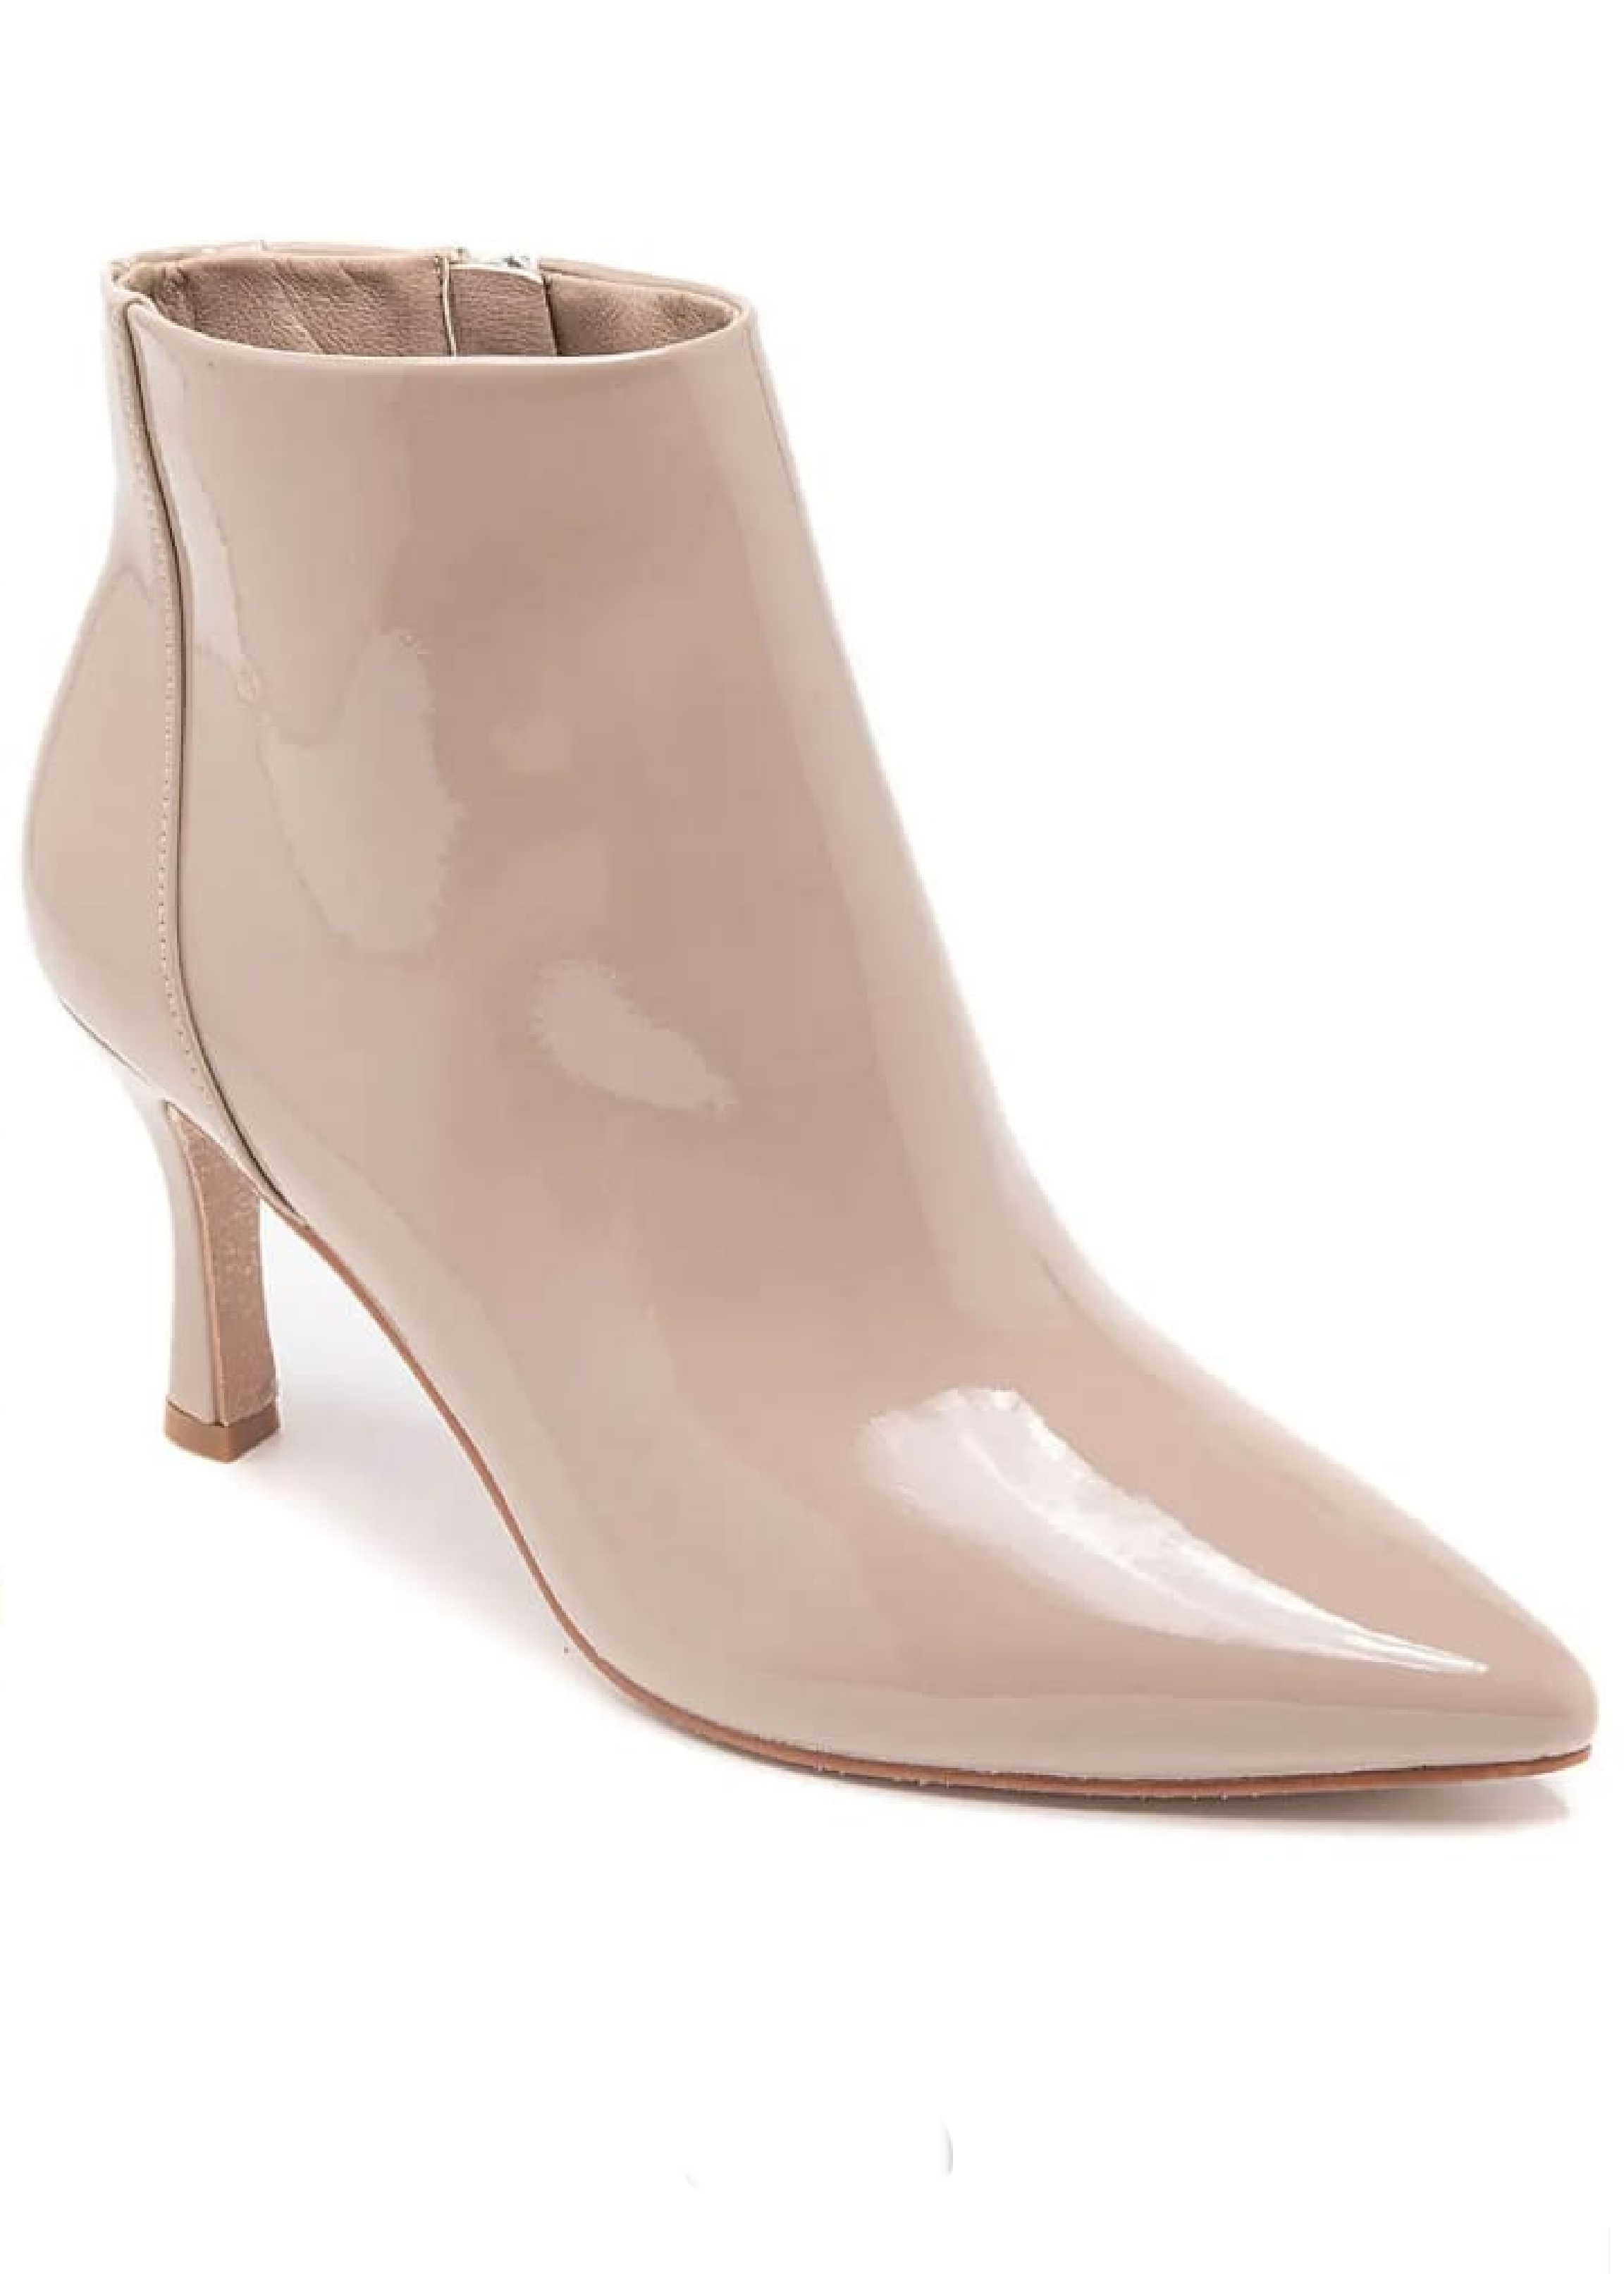 Scilla Beige Patent Ankle Boots